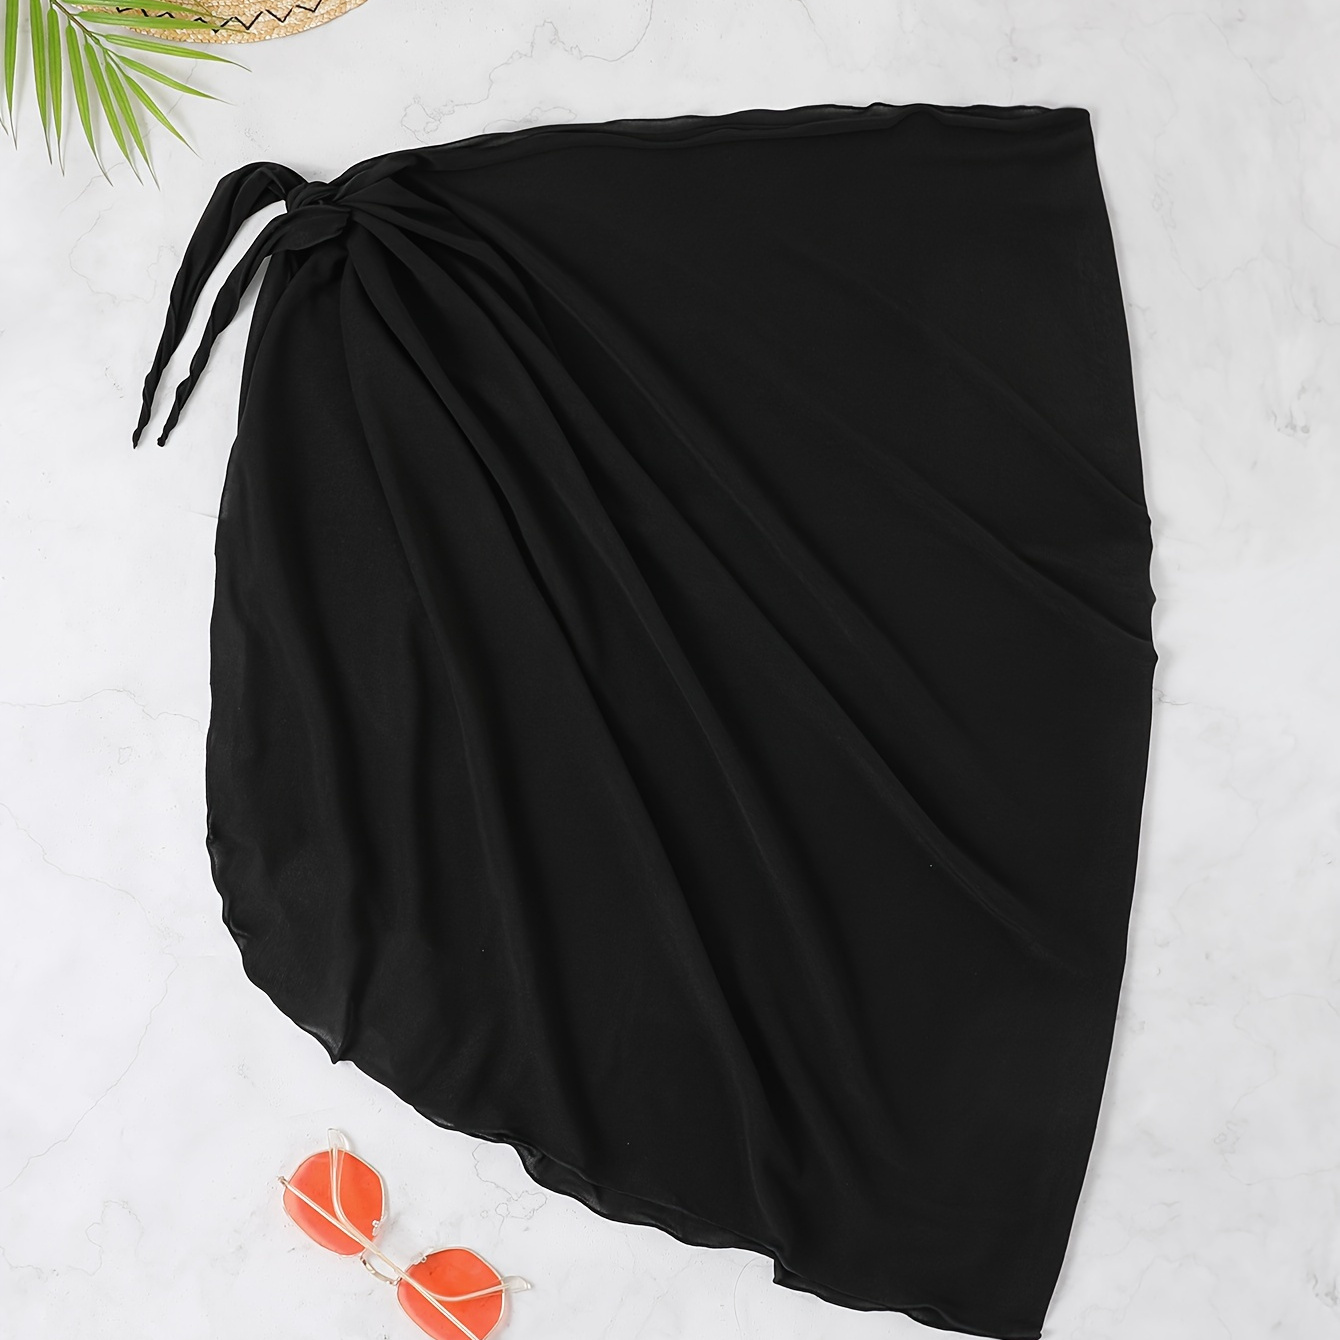 Solid Color Casual Cover Up Skirt, Semi-sheer Elegant Beach Wrap Coverup, Women's Swimwear & Clothing